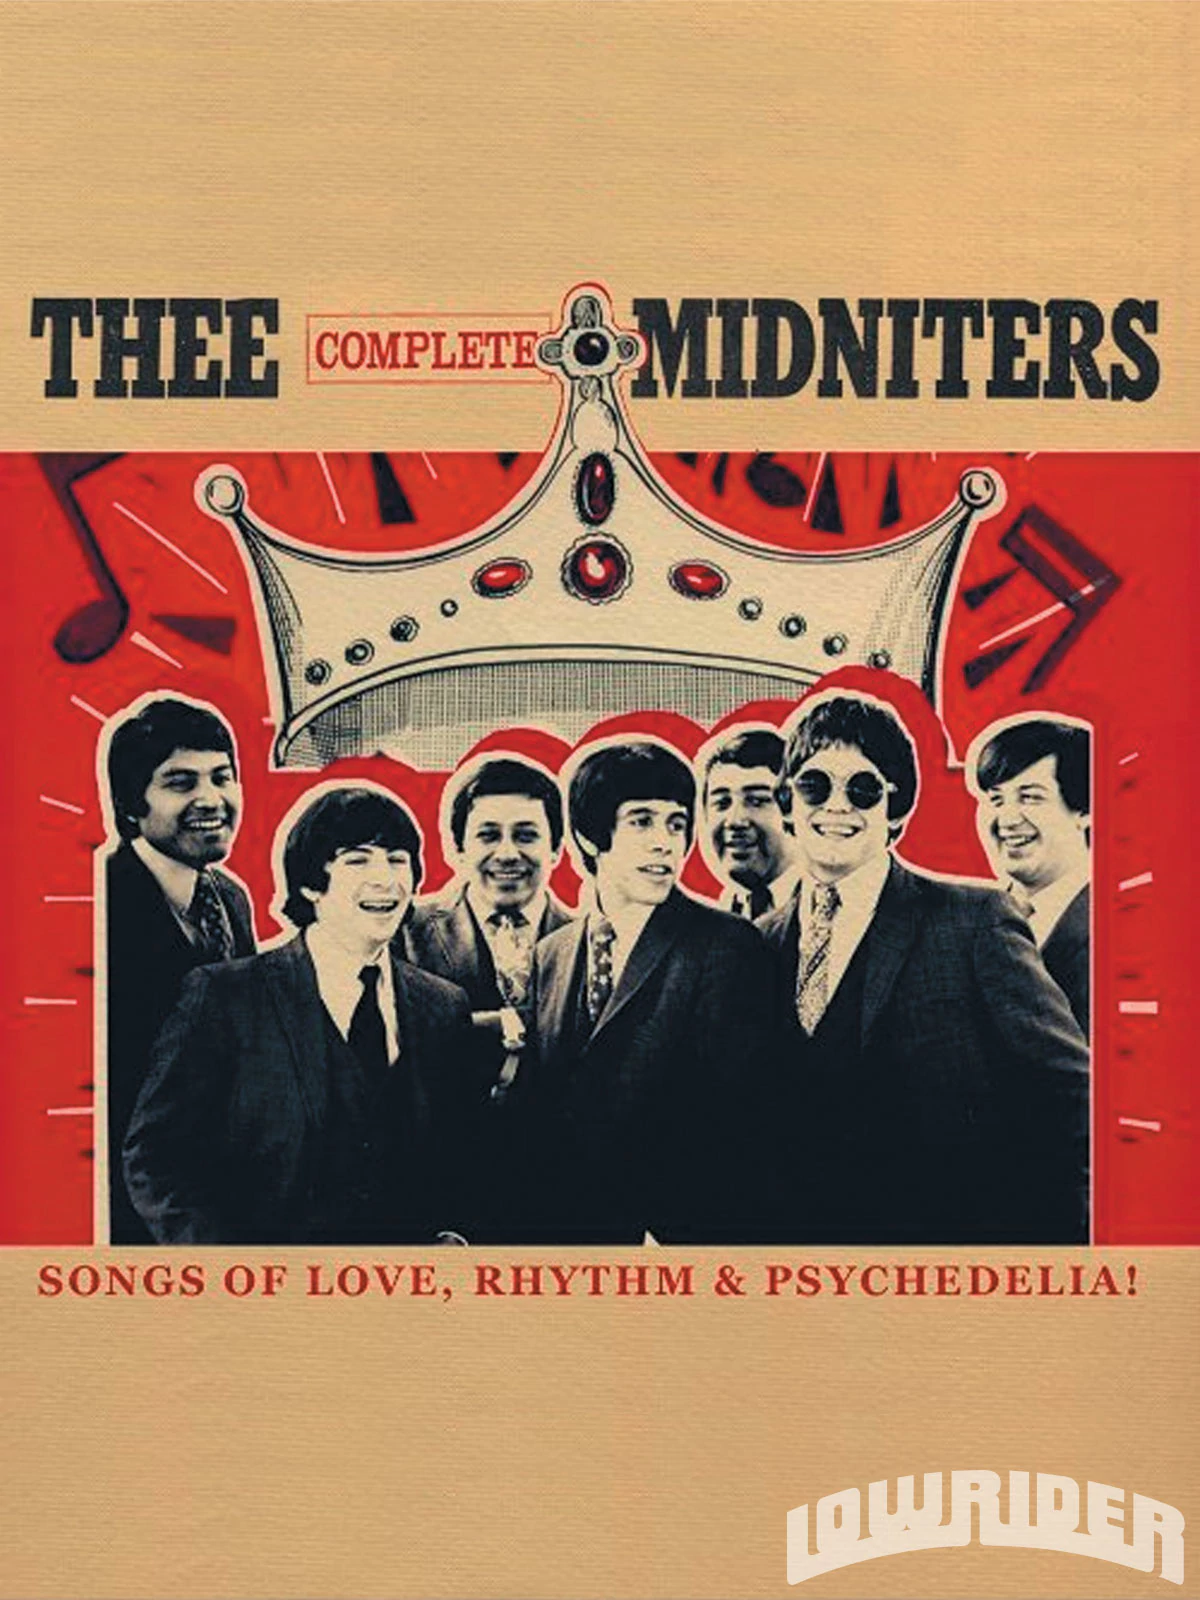 Thee Midniters Thee Midniters Cannibal and the Headhunters and Chris Montez